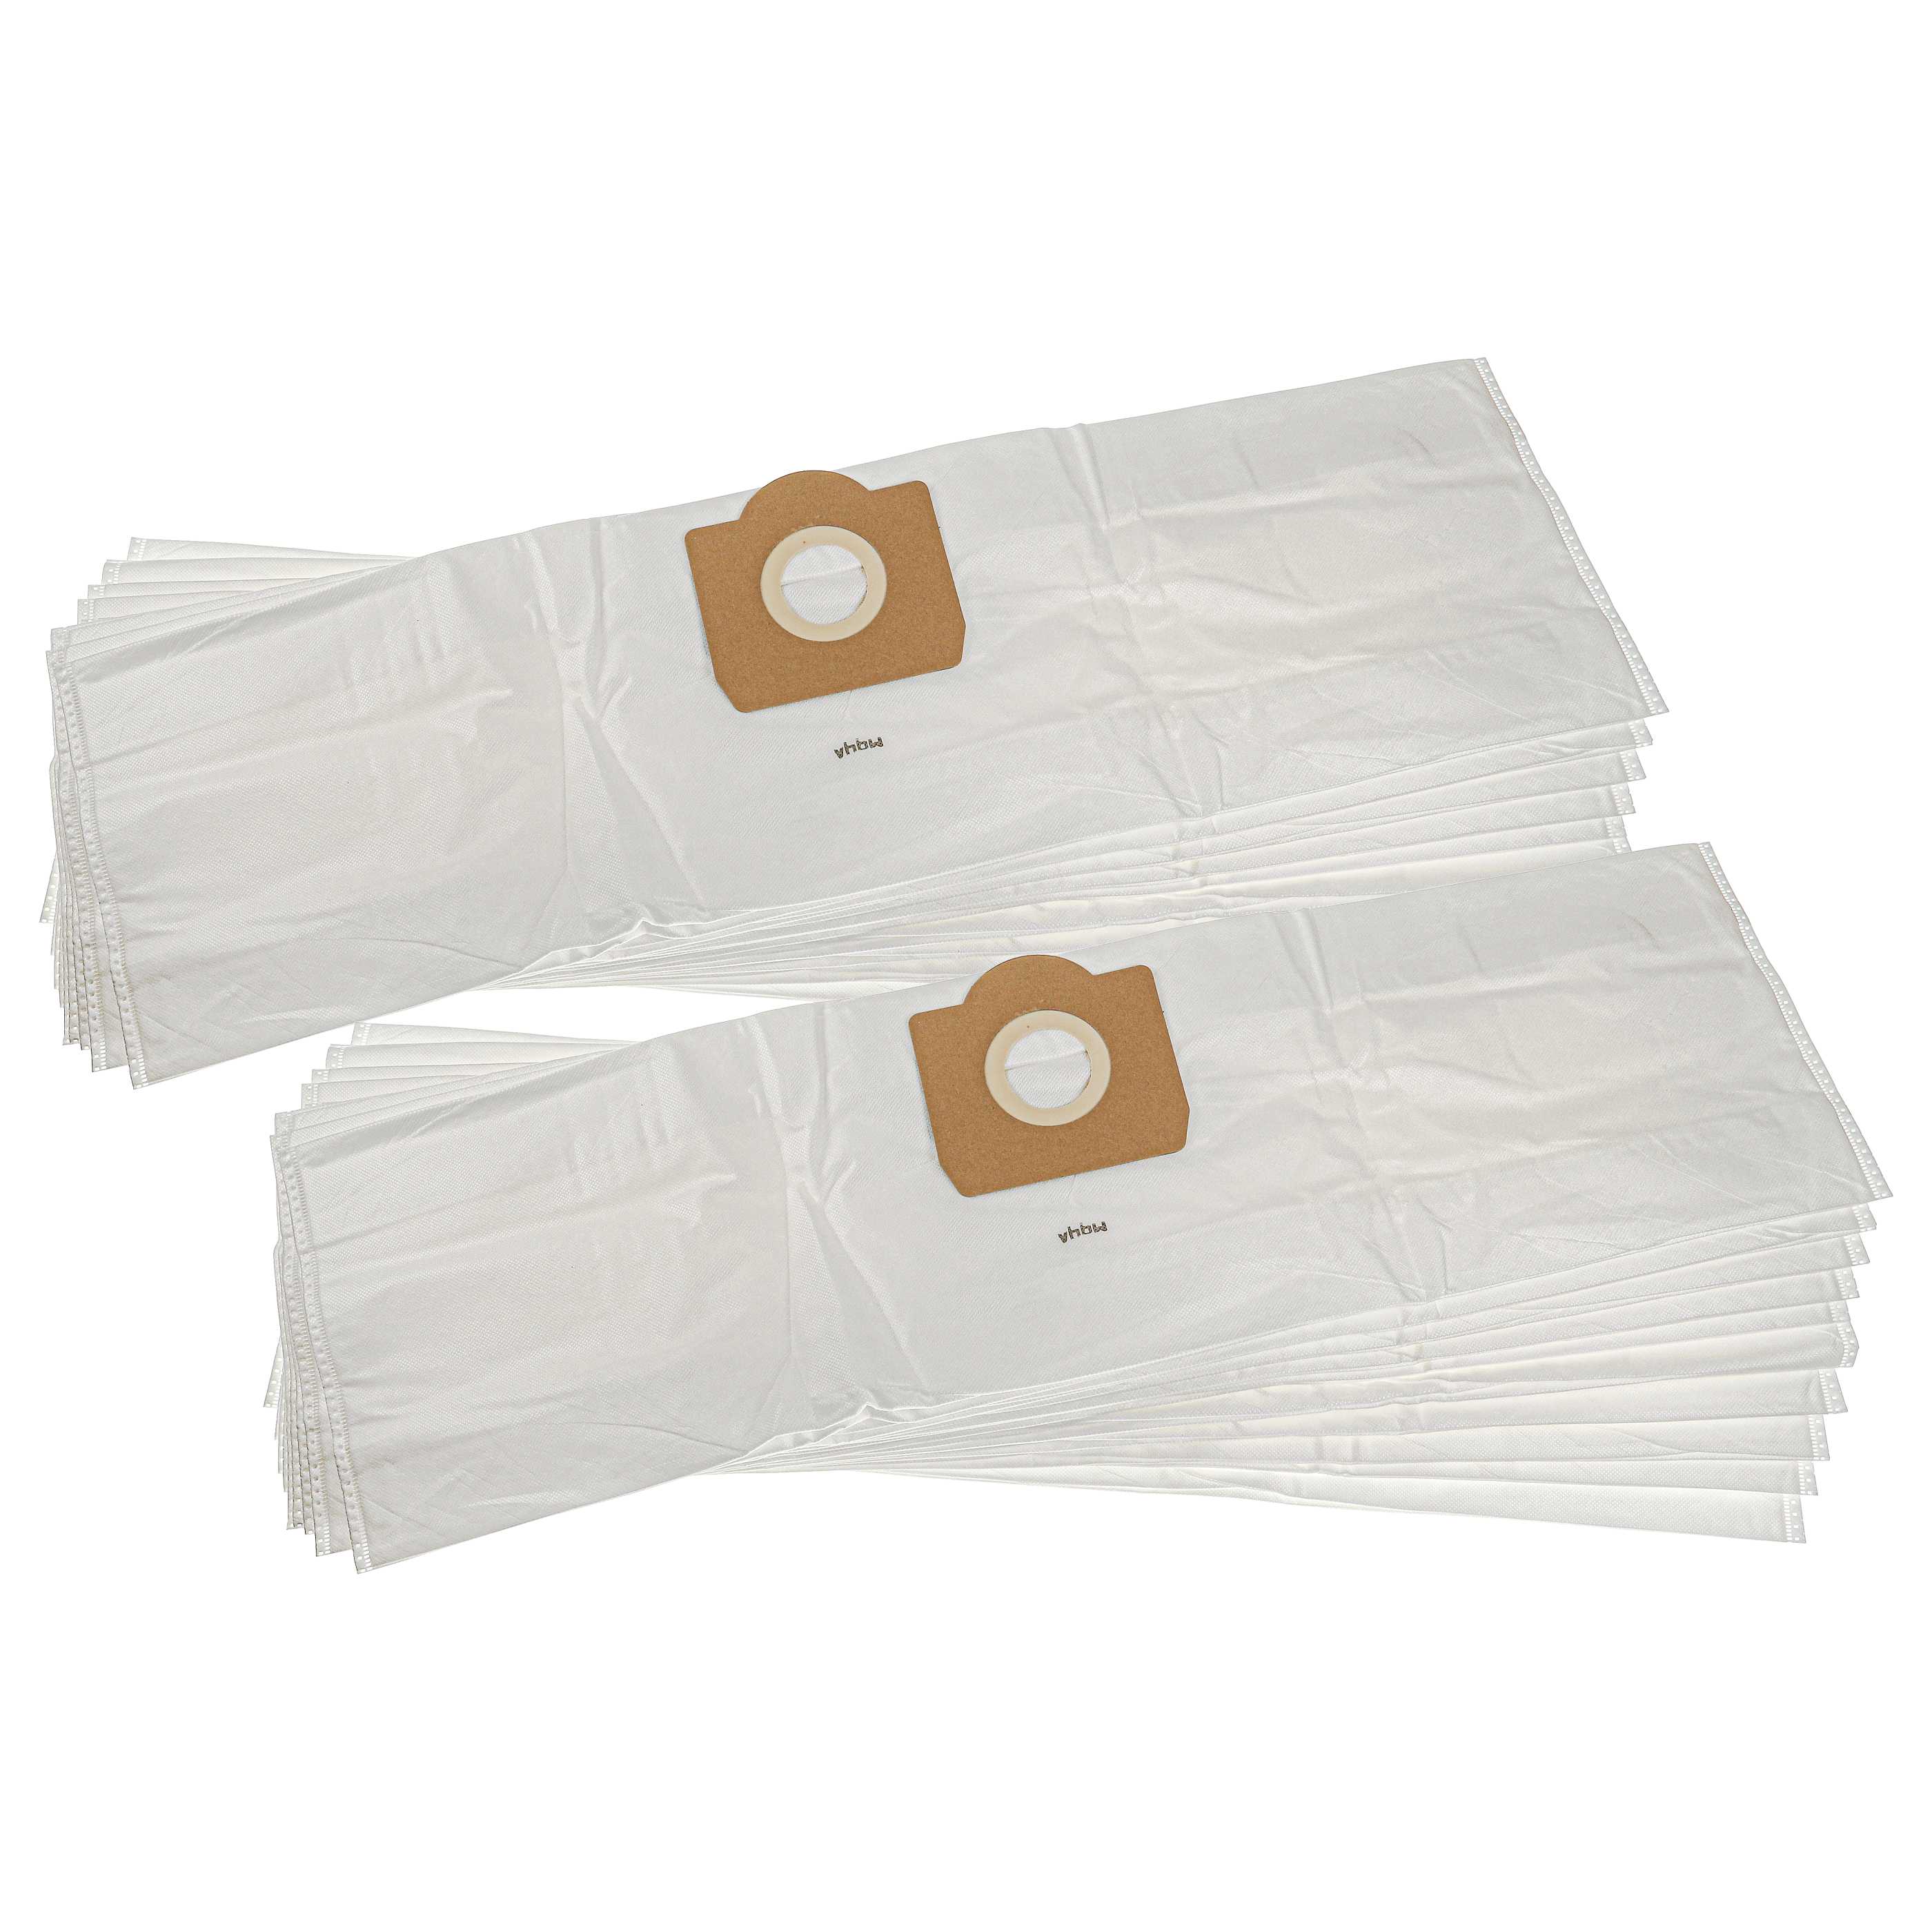 20x Vacuum Cleaner Bag replaces Bosch/Siemens Typ X, Typ W for Bavaria - microfleece